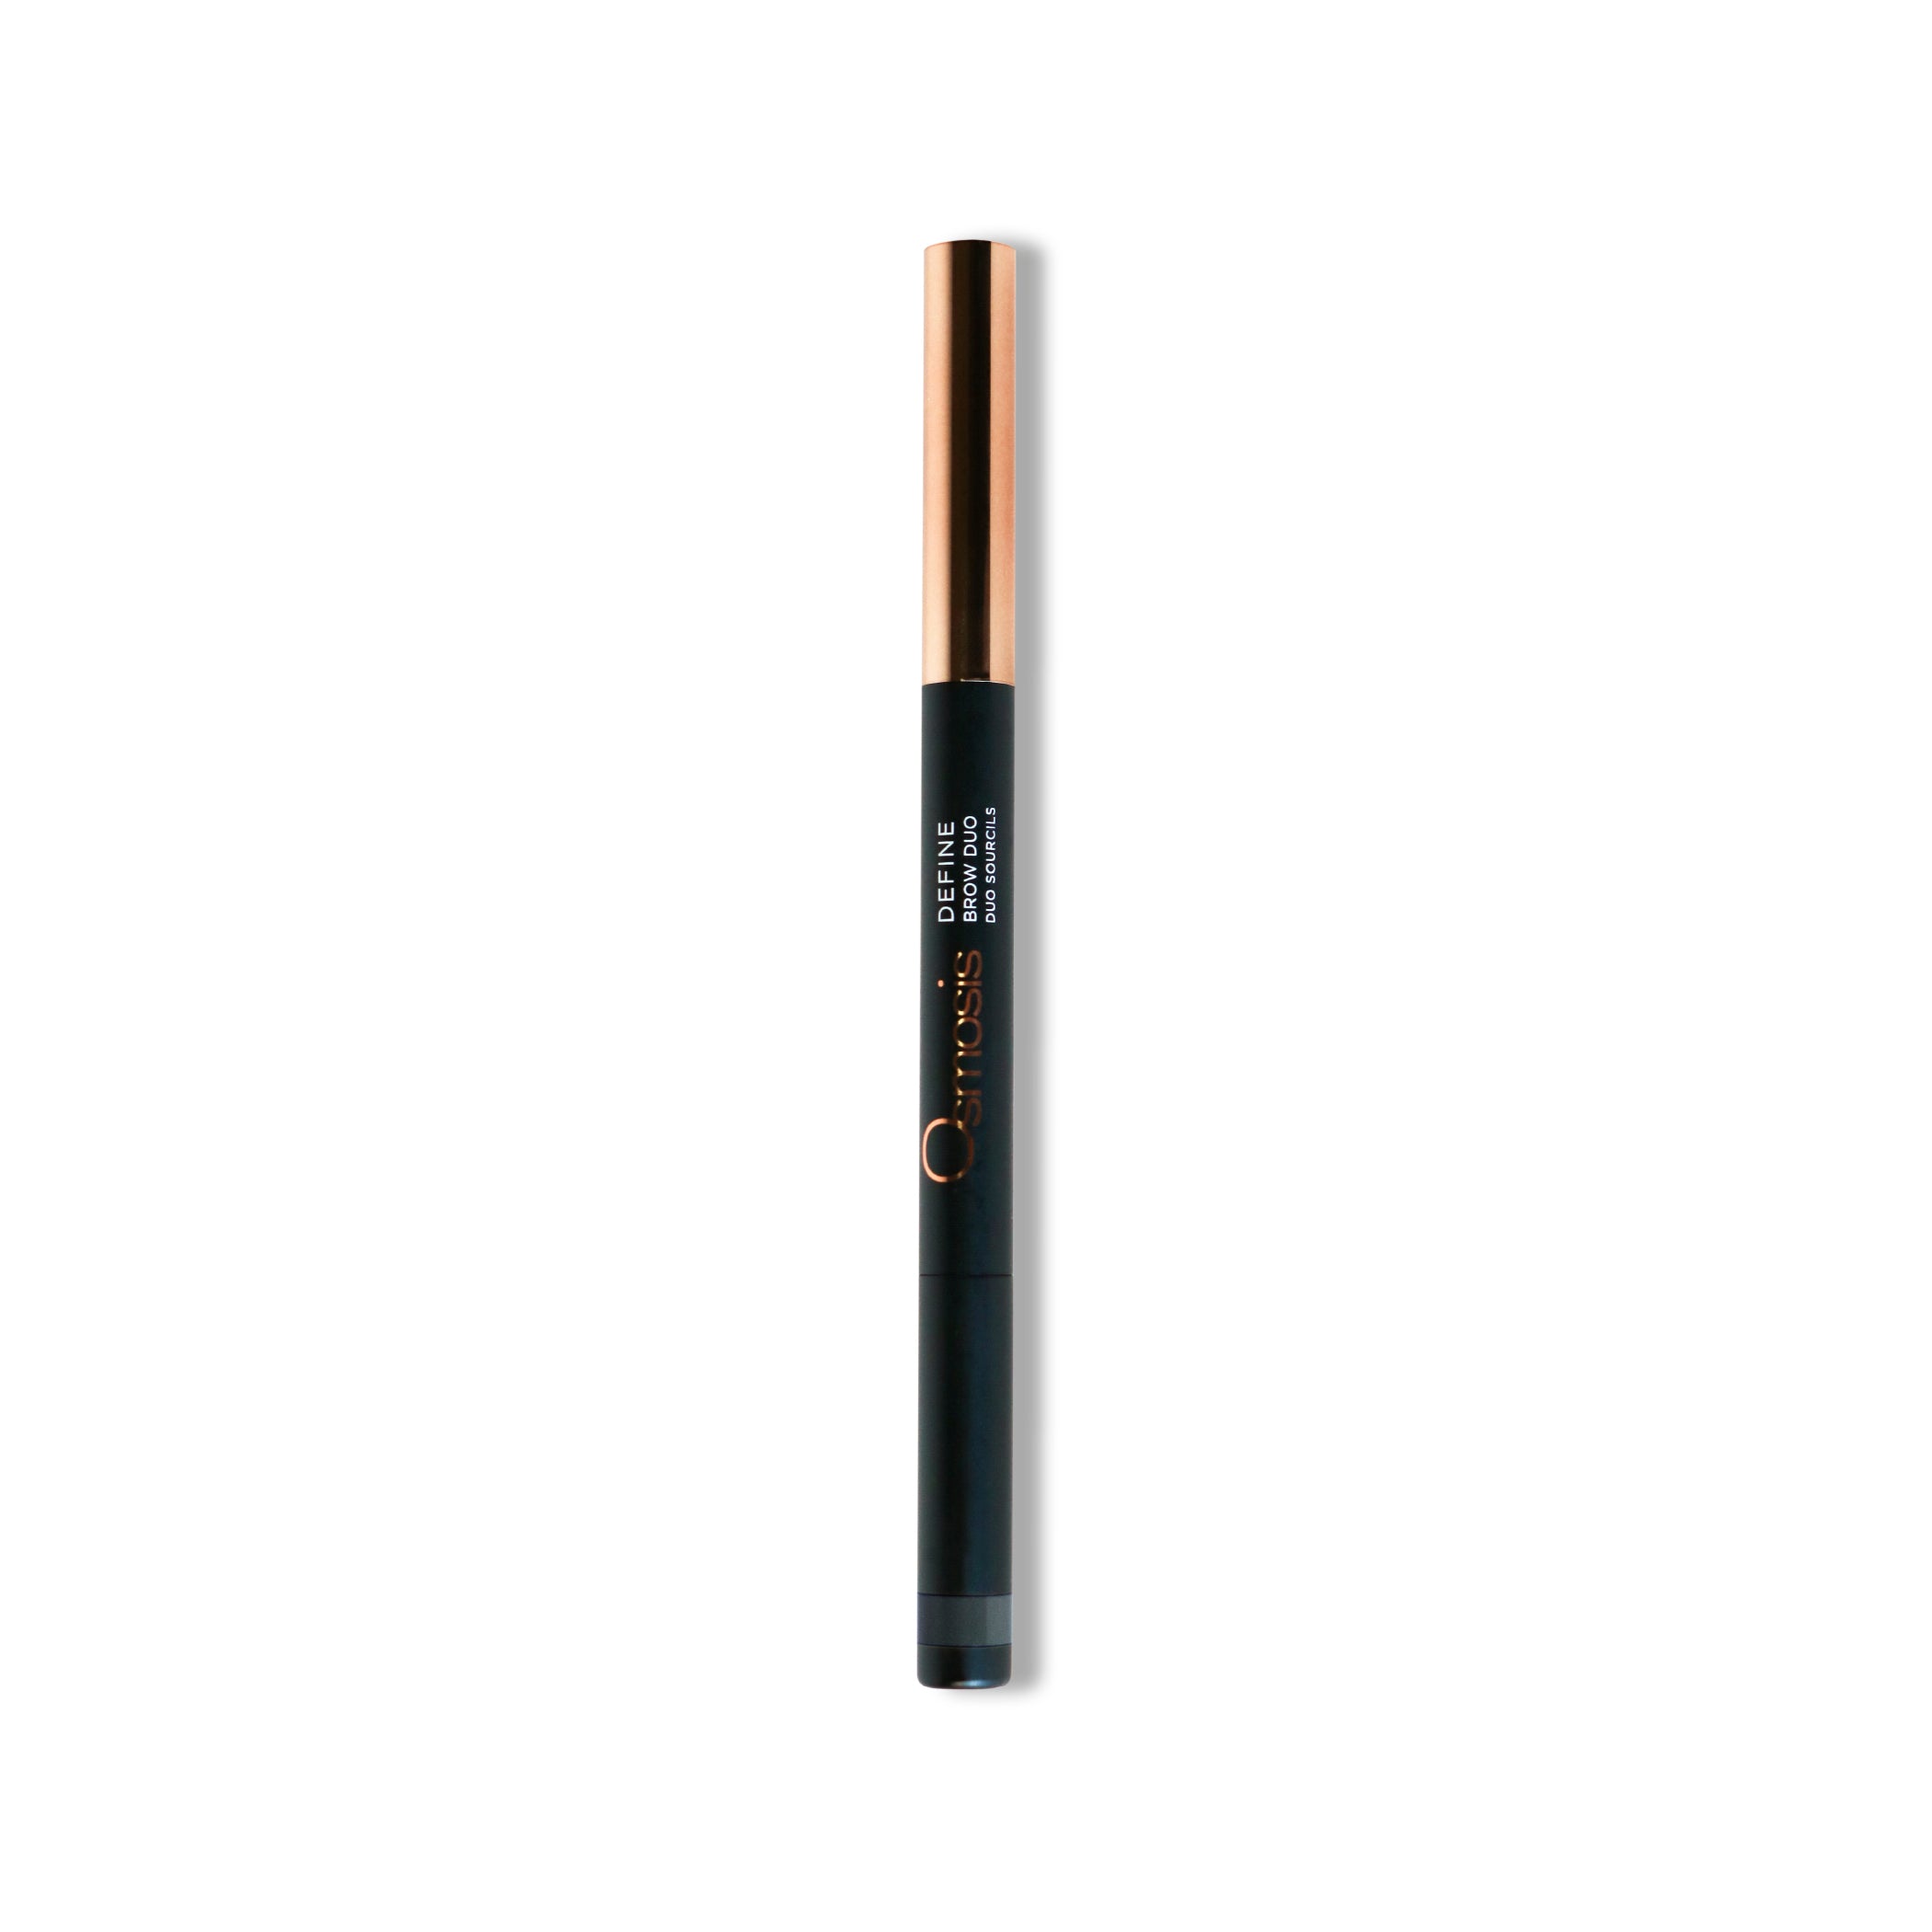 Brow gel and pencil duo color cacao by Osmosis Beauty makeup